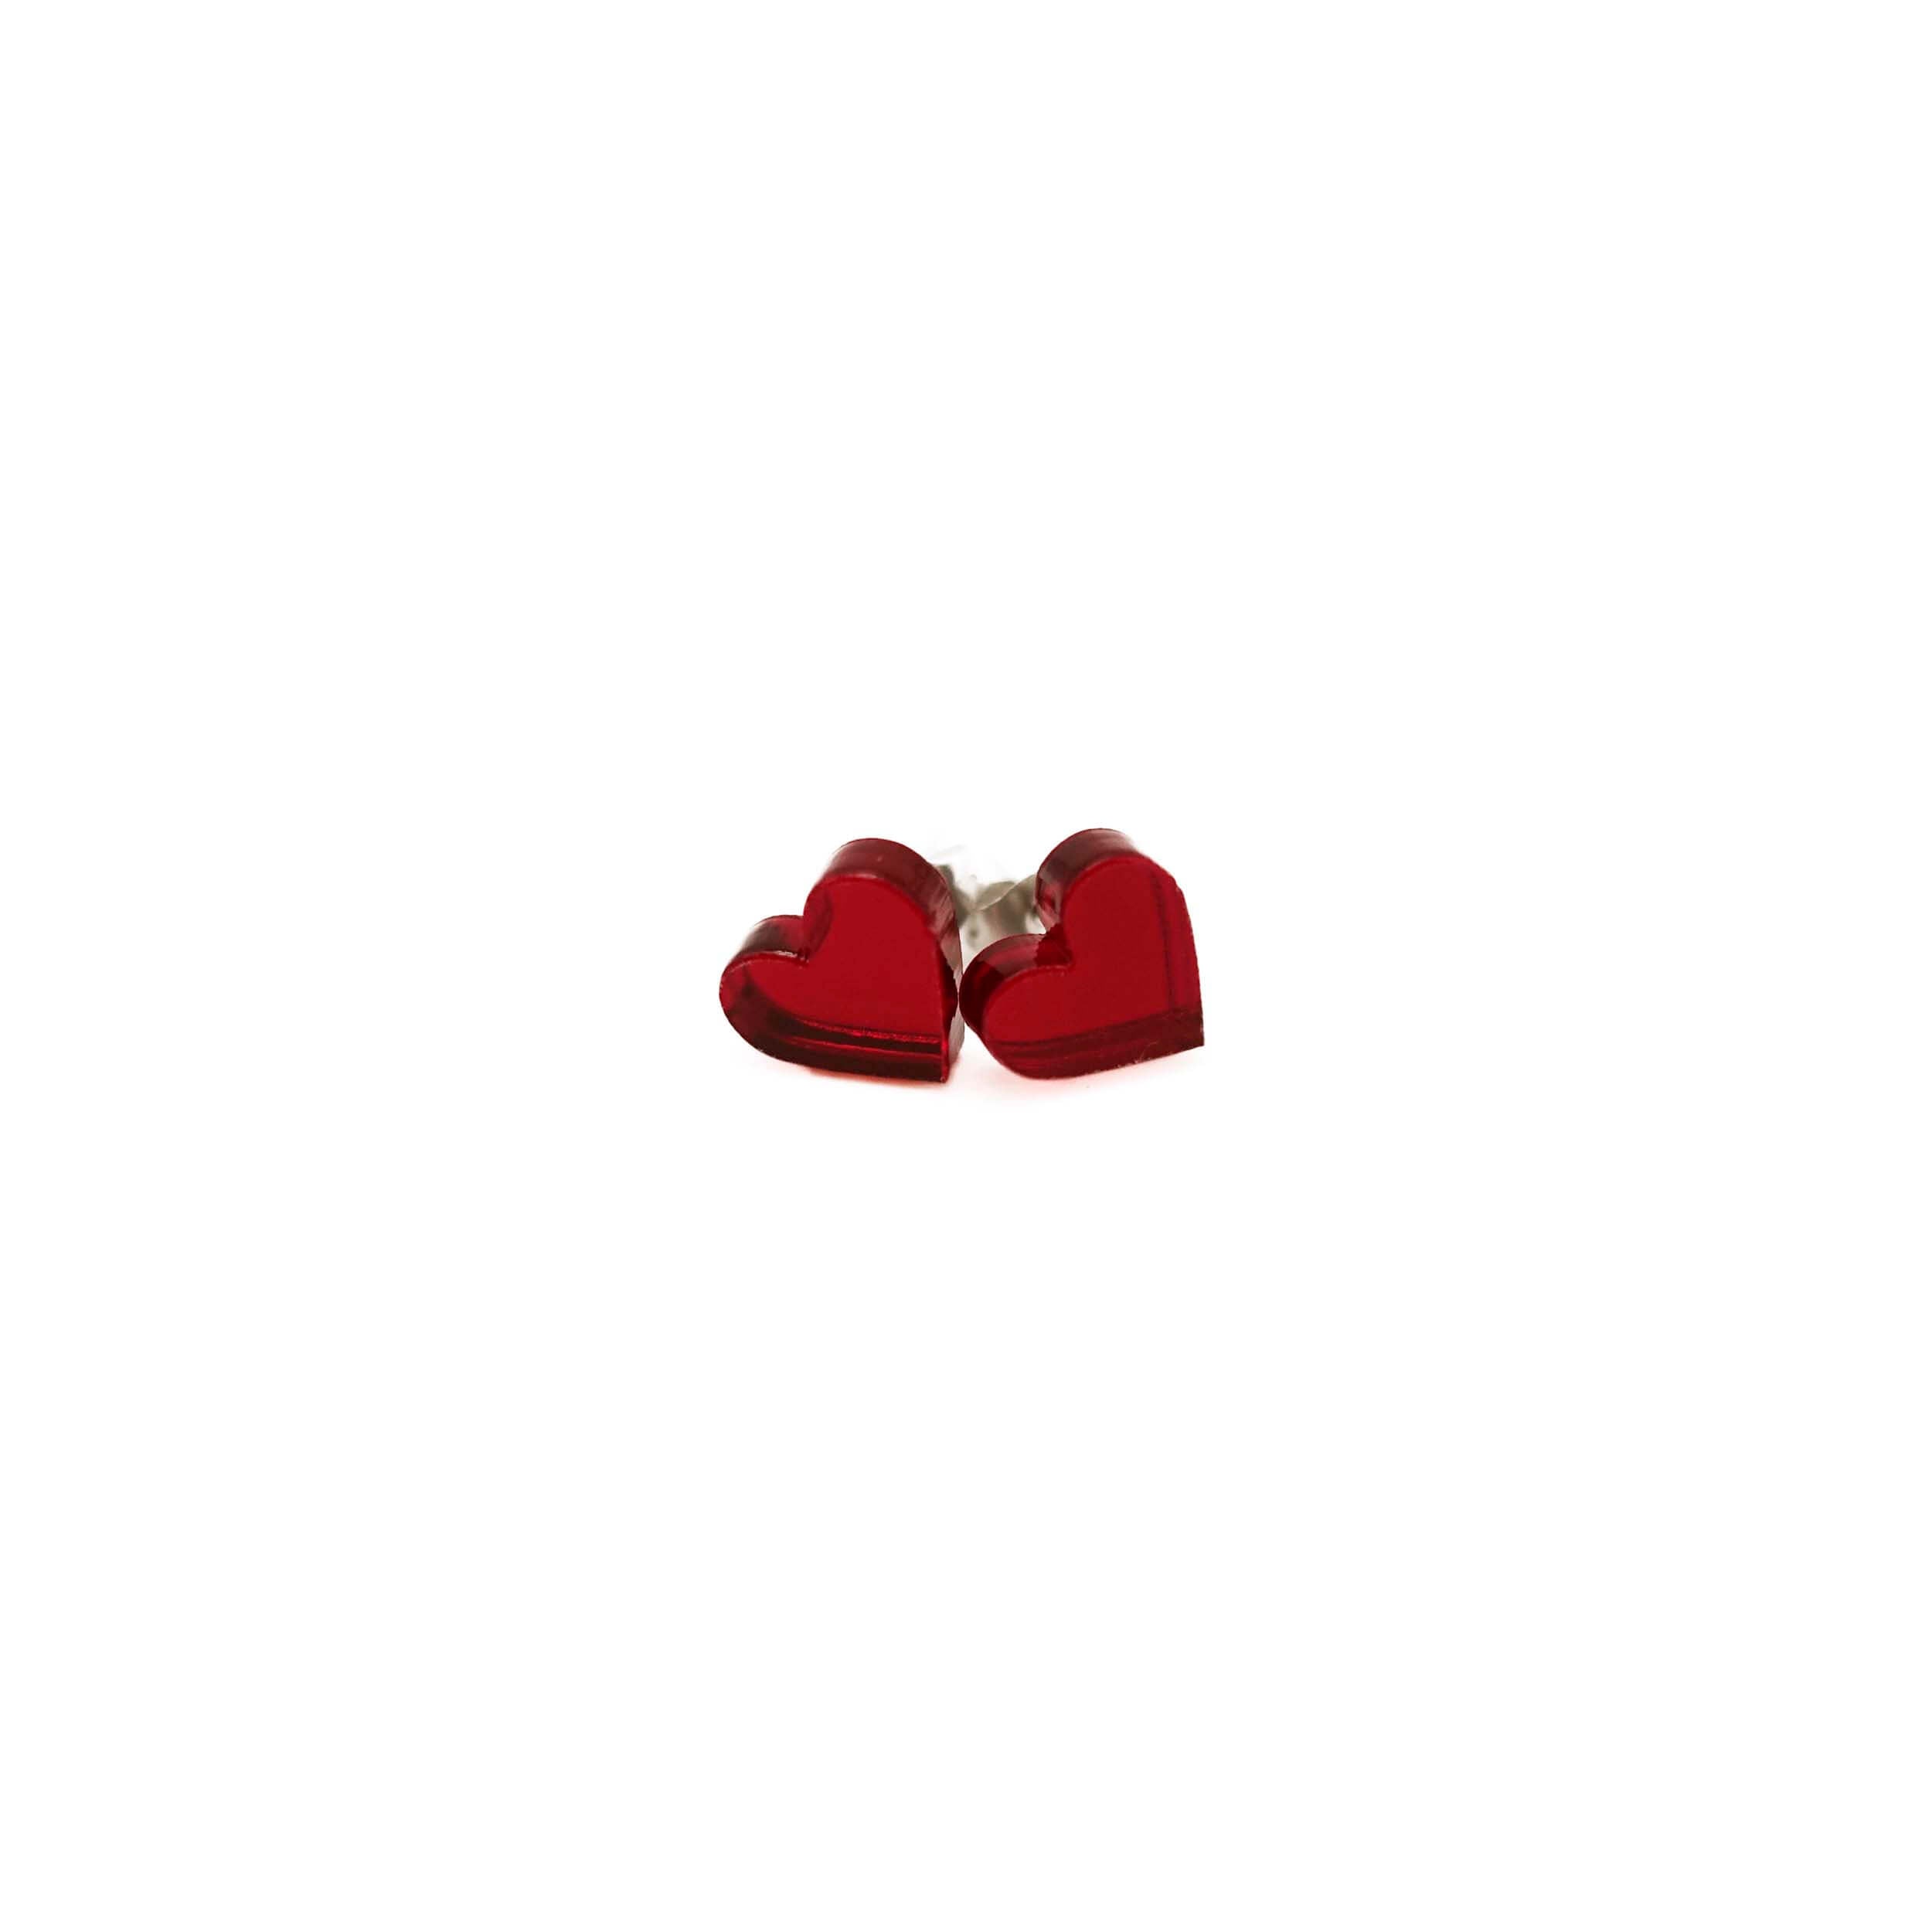 Crimson red mirror tiny heart stud earrings shown on a white background. 